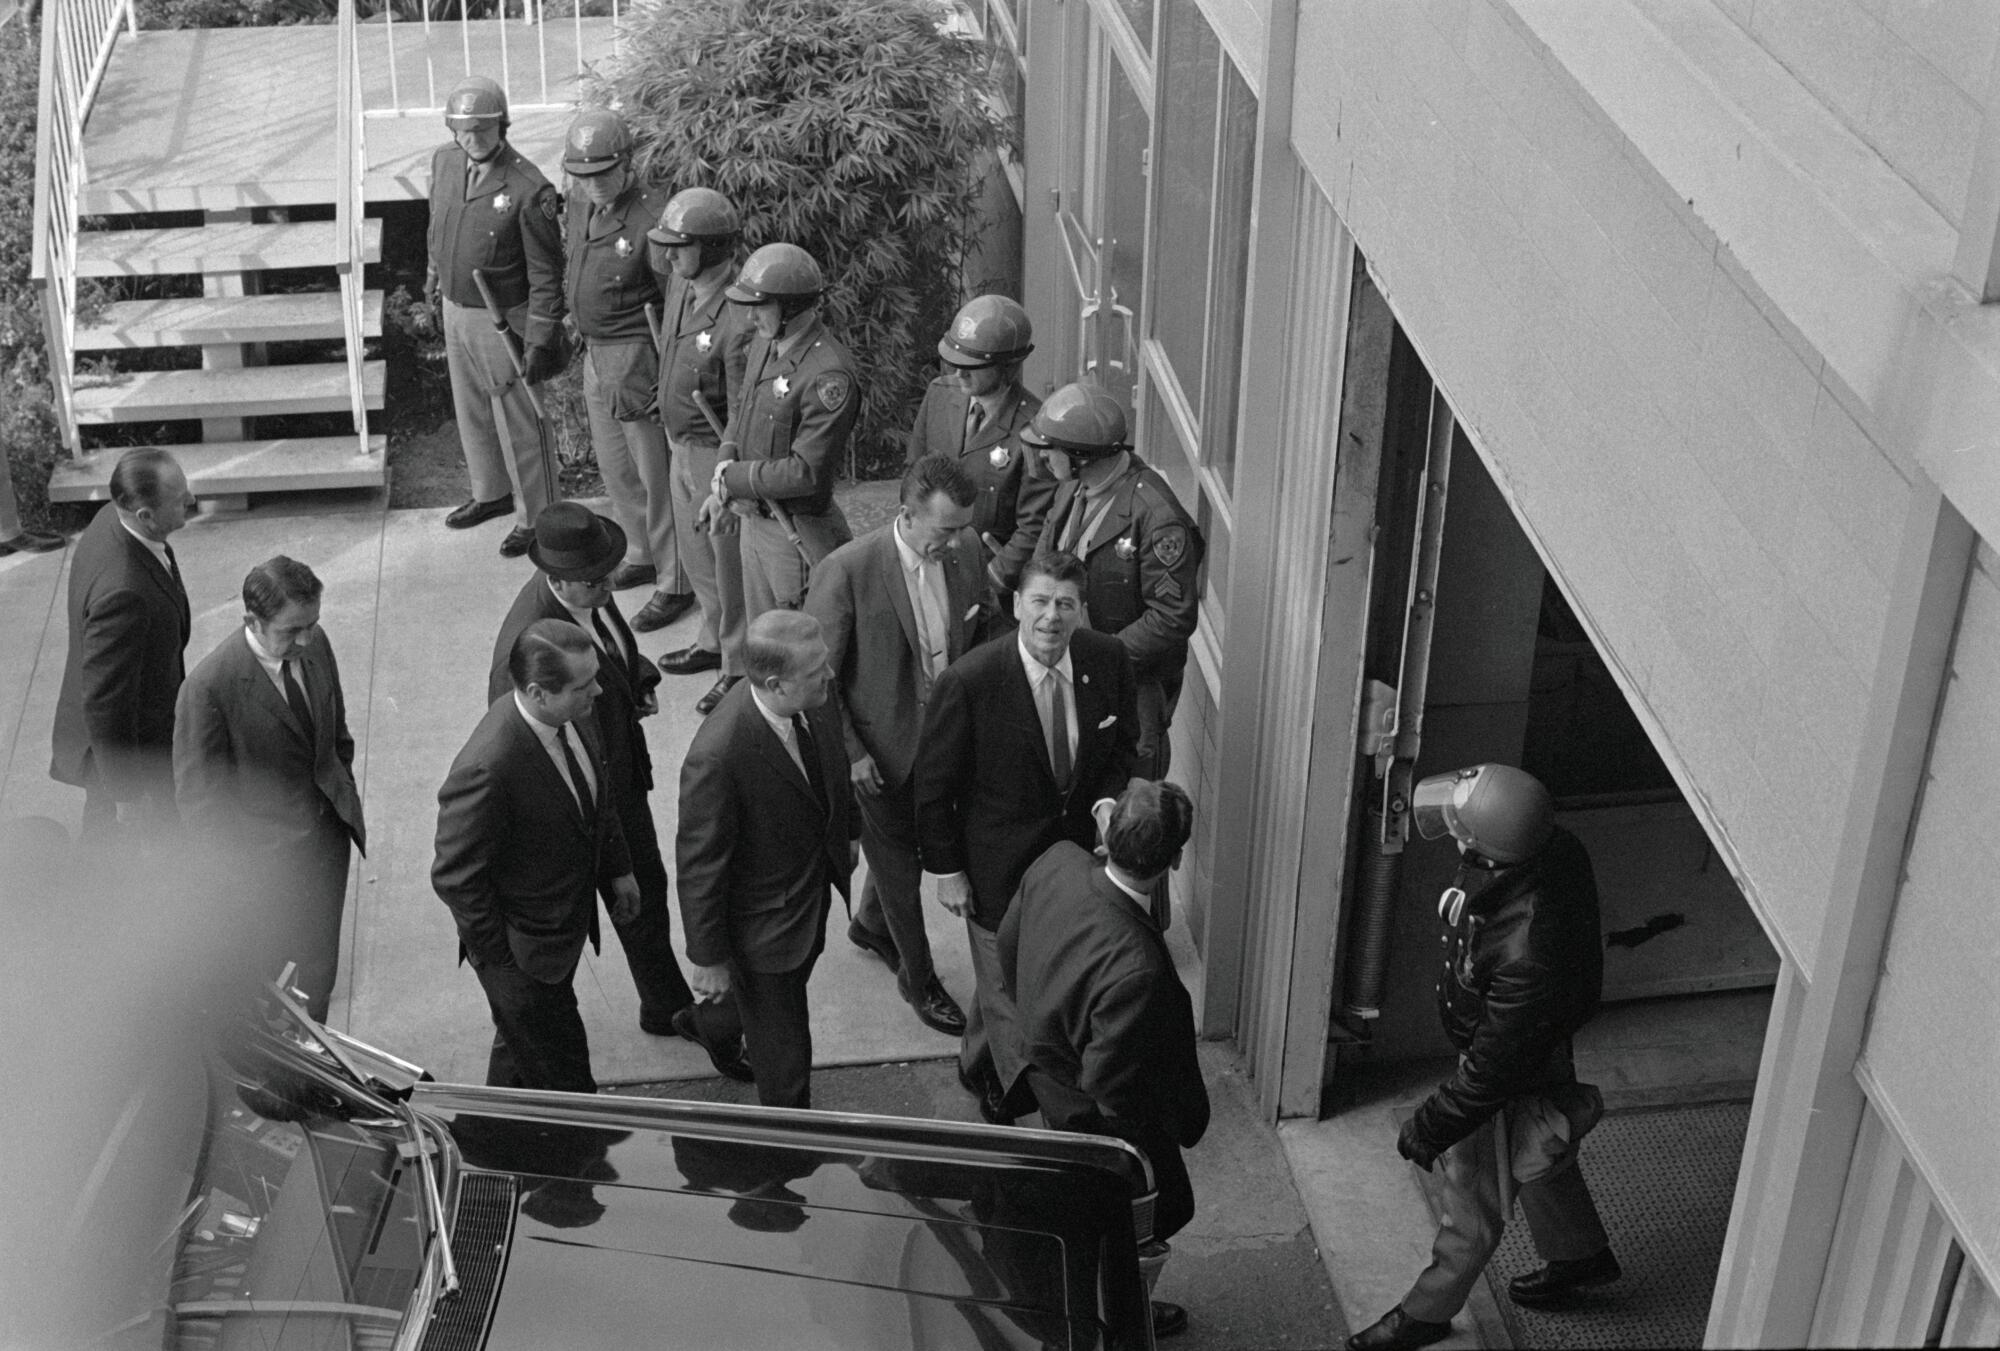 Gov. Ronald Reagan walks past some of the 100 law enforcement officers assembled at University Hall at UC Berkeley.